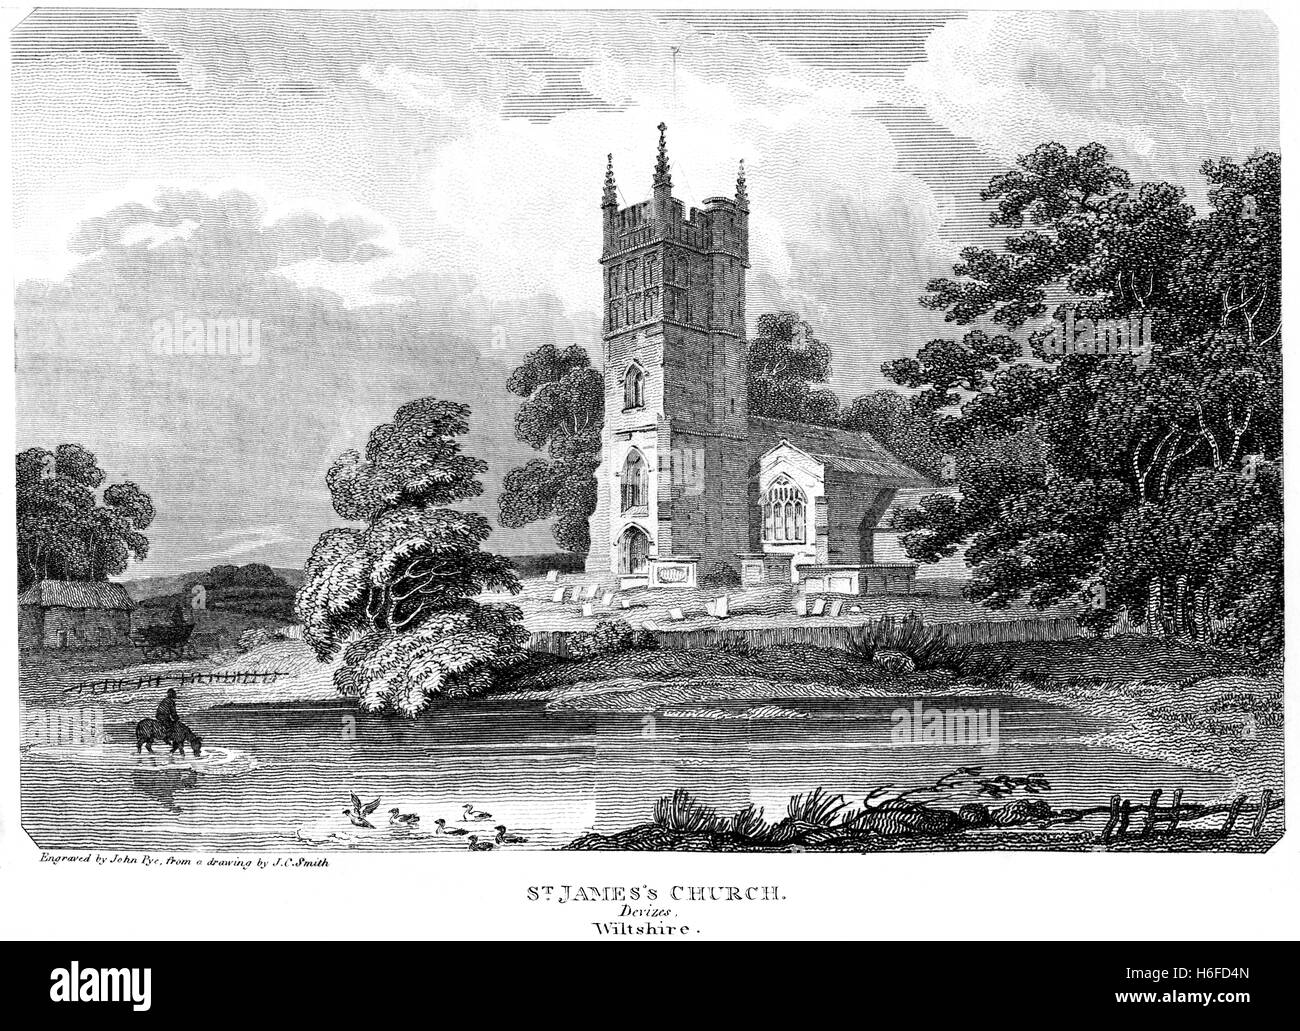 An engraving of St James Church, Devizes, Wiltshire scanned at high resolution from a book printed in 1812. Believed copyright free. Stock Photo